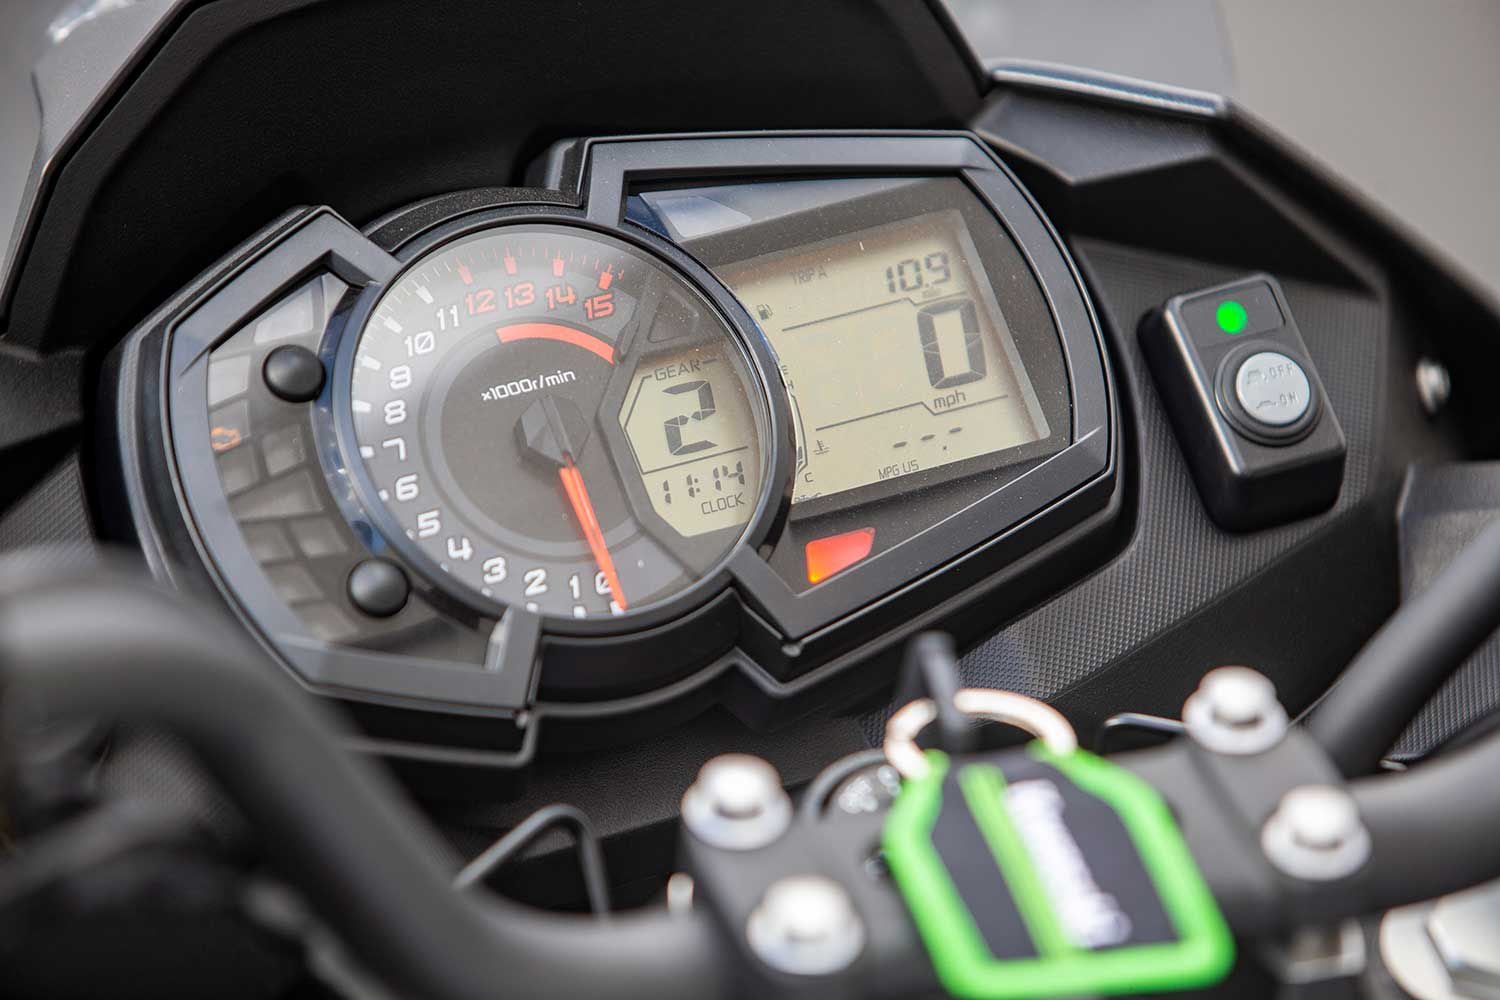 The LCD analog dashboard is rudimentary in terms of 2020 standards, but provides all the vital riding information.